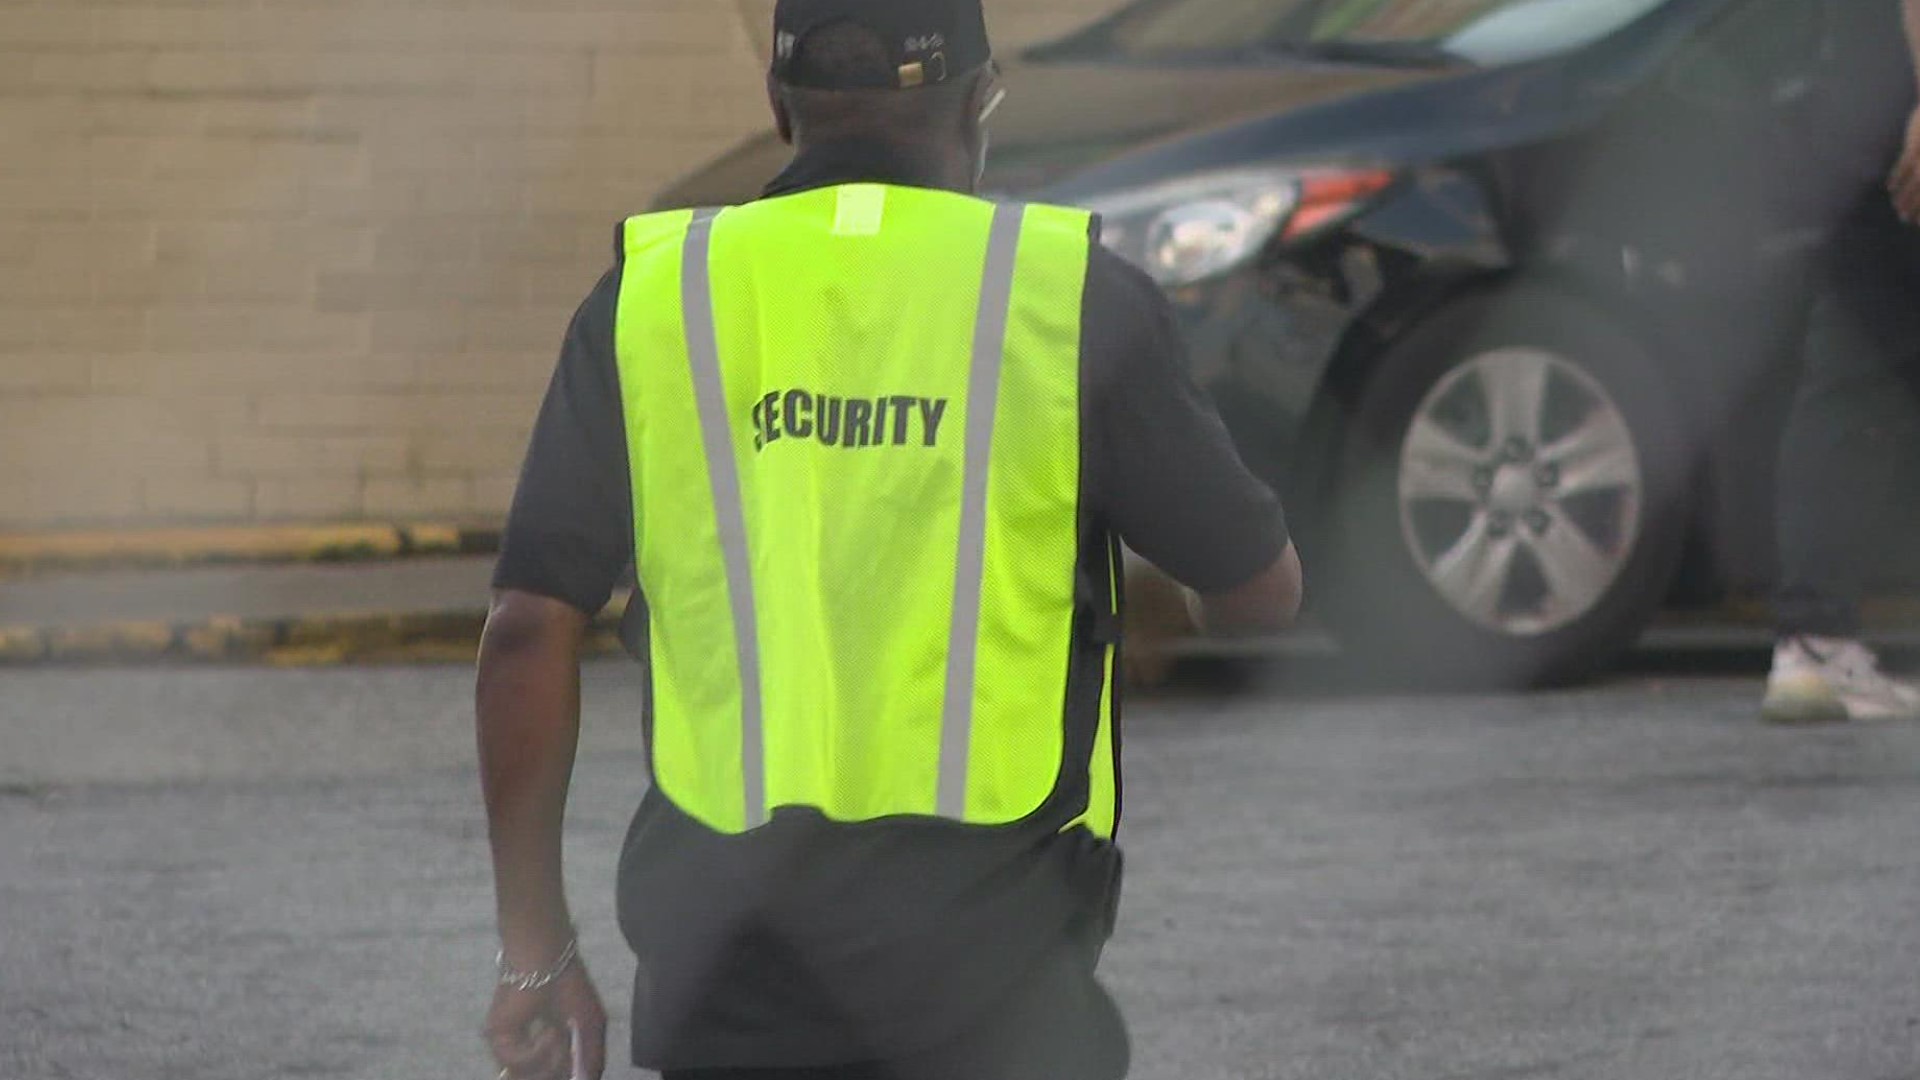 Peachtree Rides is making some adjustments to their security measures following the nearby incident.